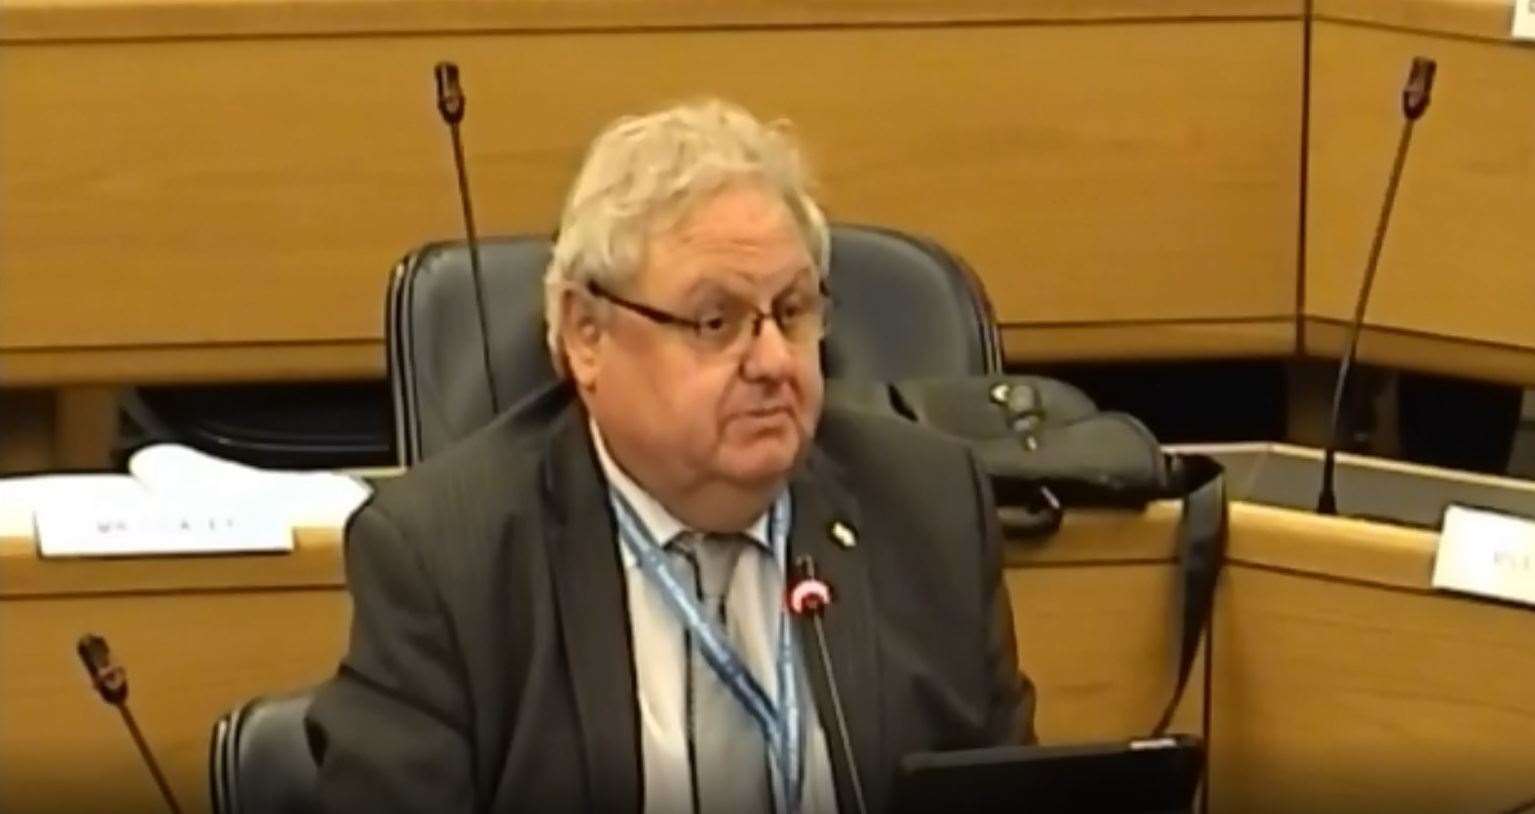 Swale county councillor Andrew Bowles asked for the decision to close Sittingbourne's Frank Lloyd dementia unit to be sent to the Health Minister Matt Hammond. Picture: Kent County Council webcast